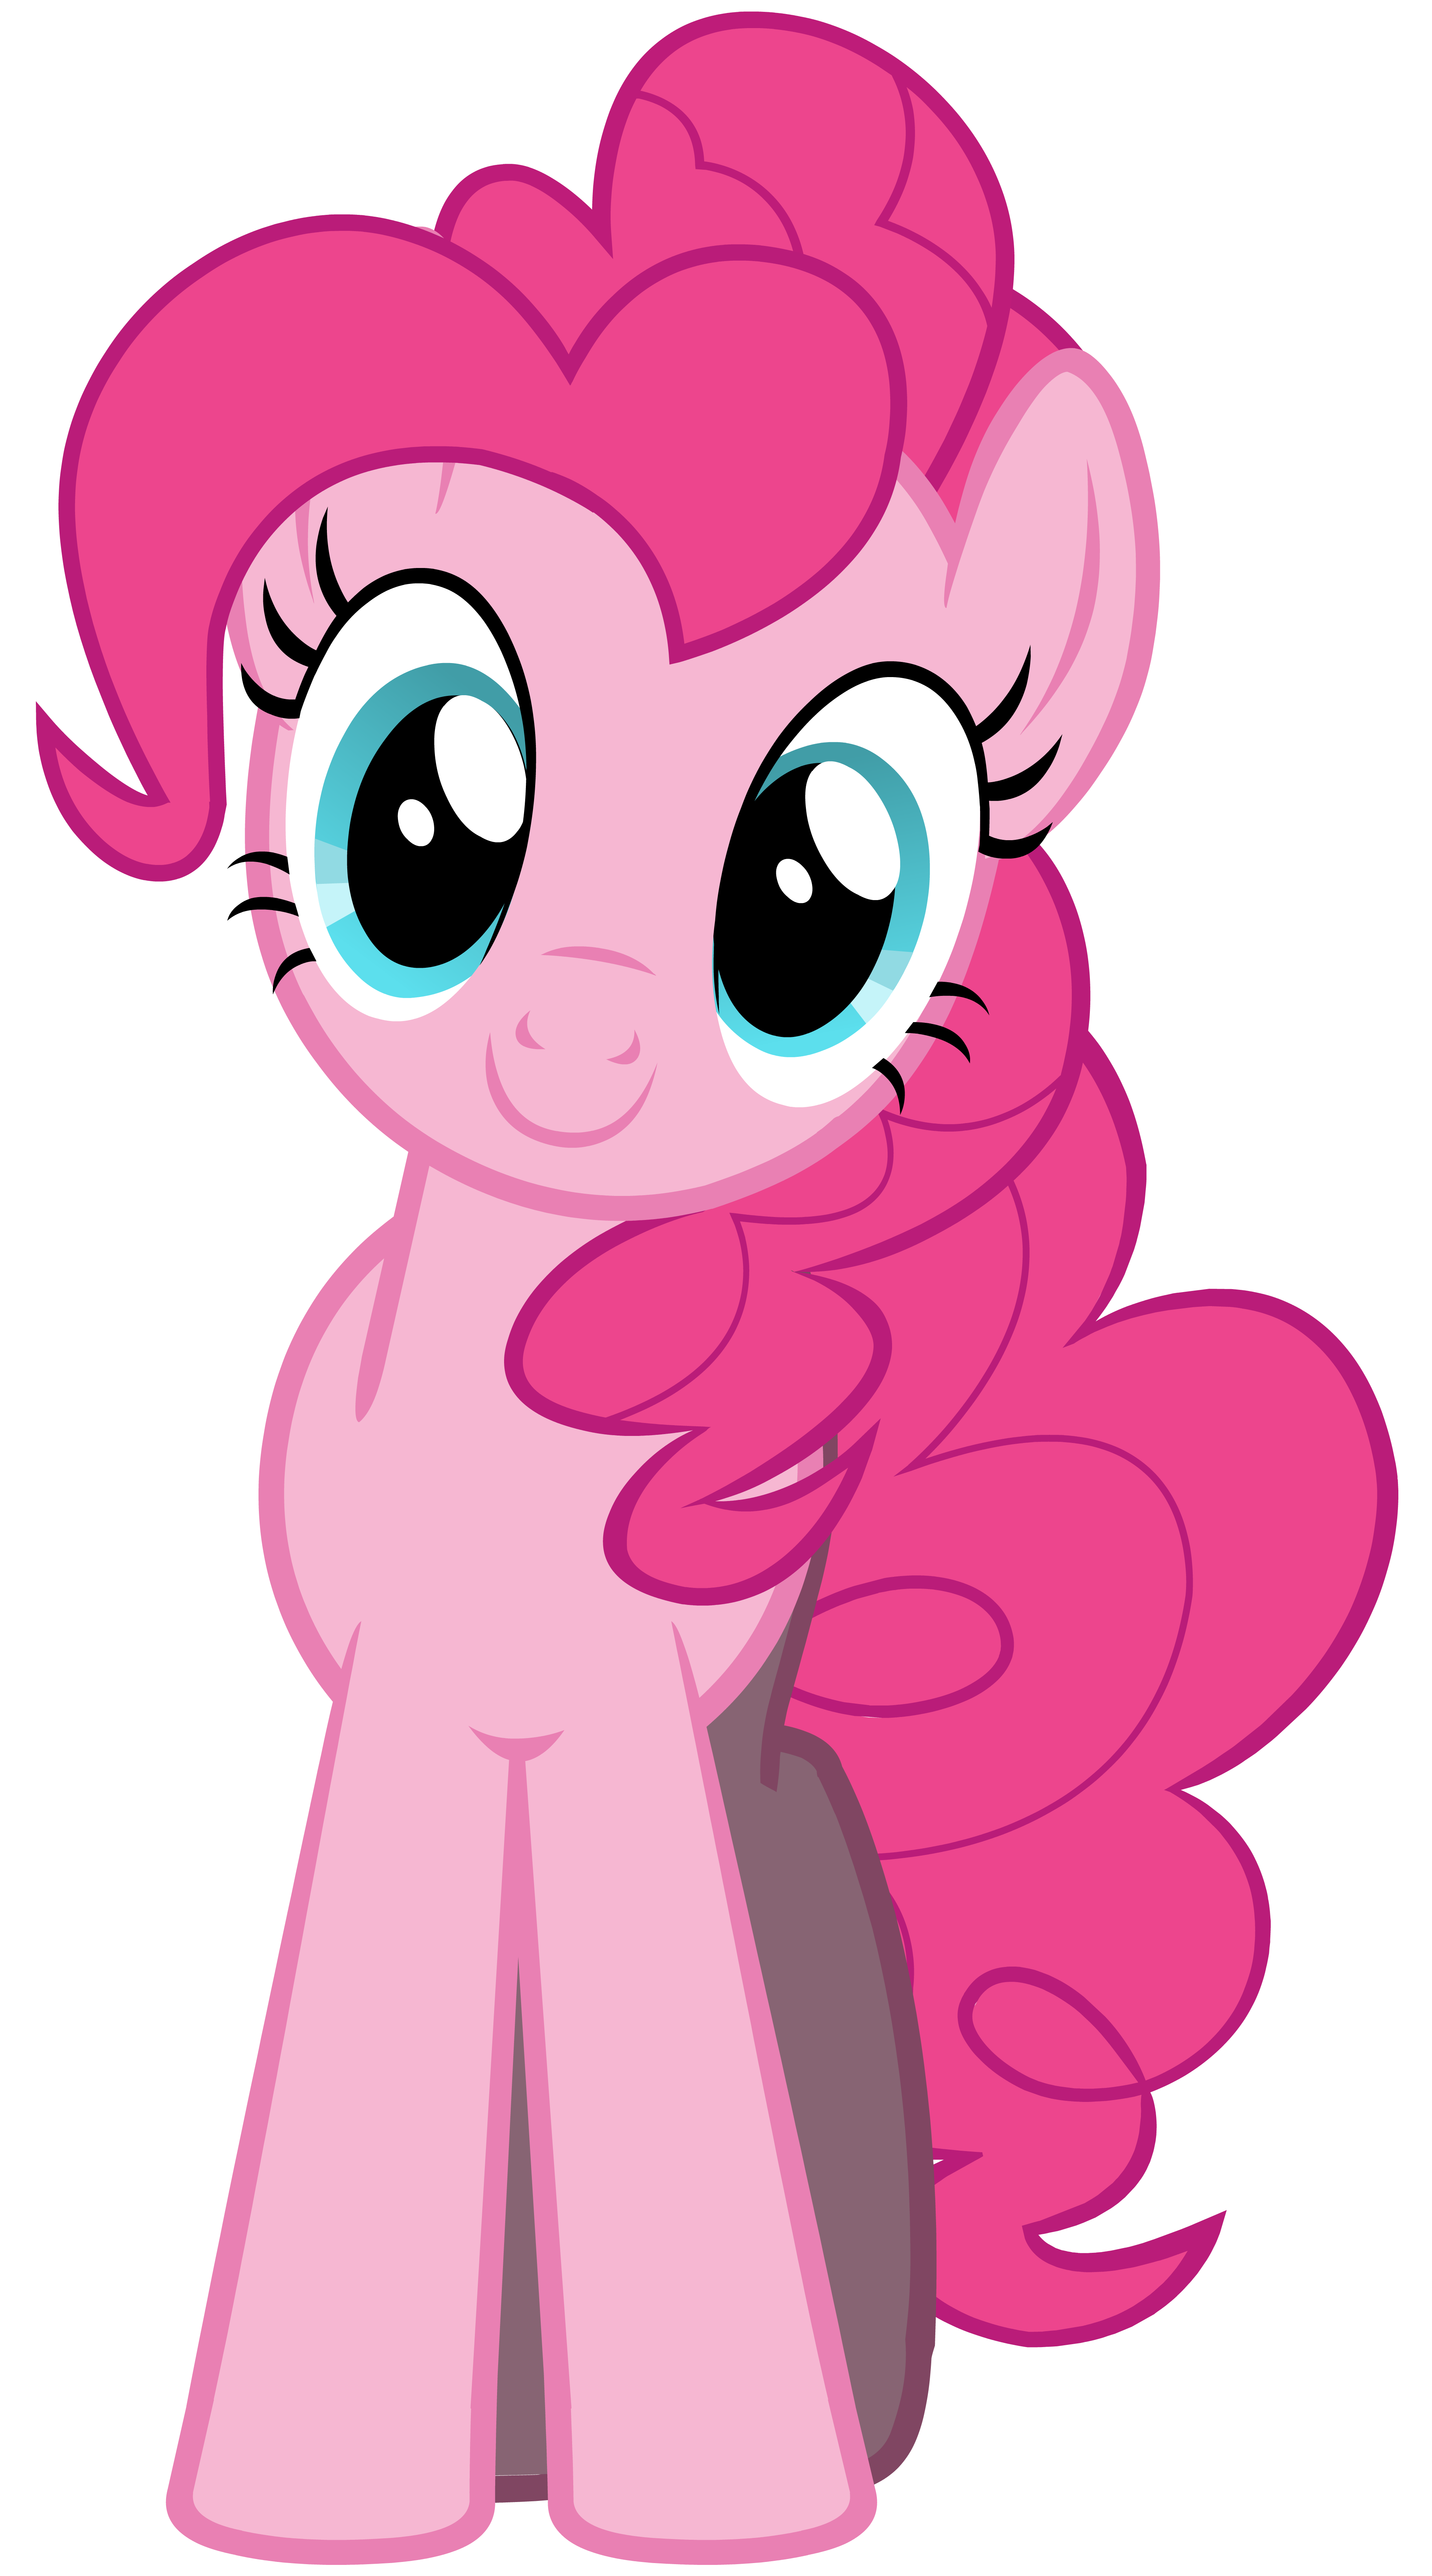 chris clapsaddle recommends pinkie pie pictures pic